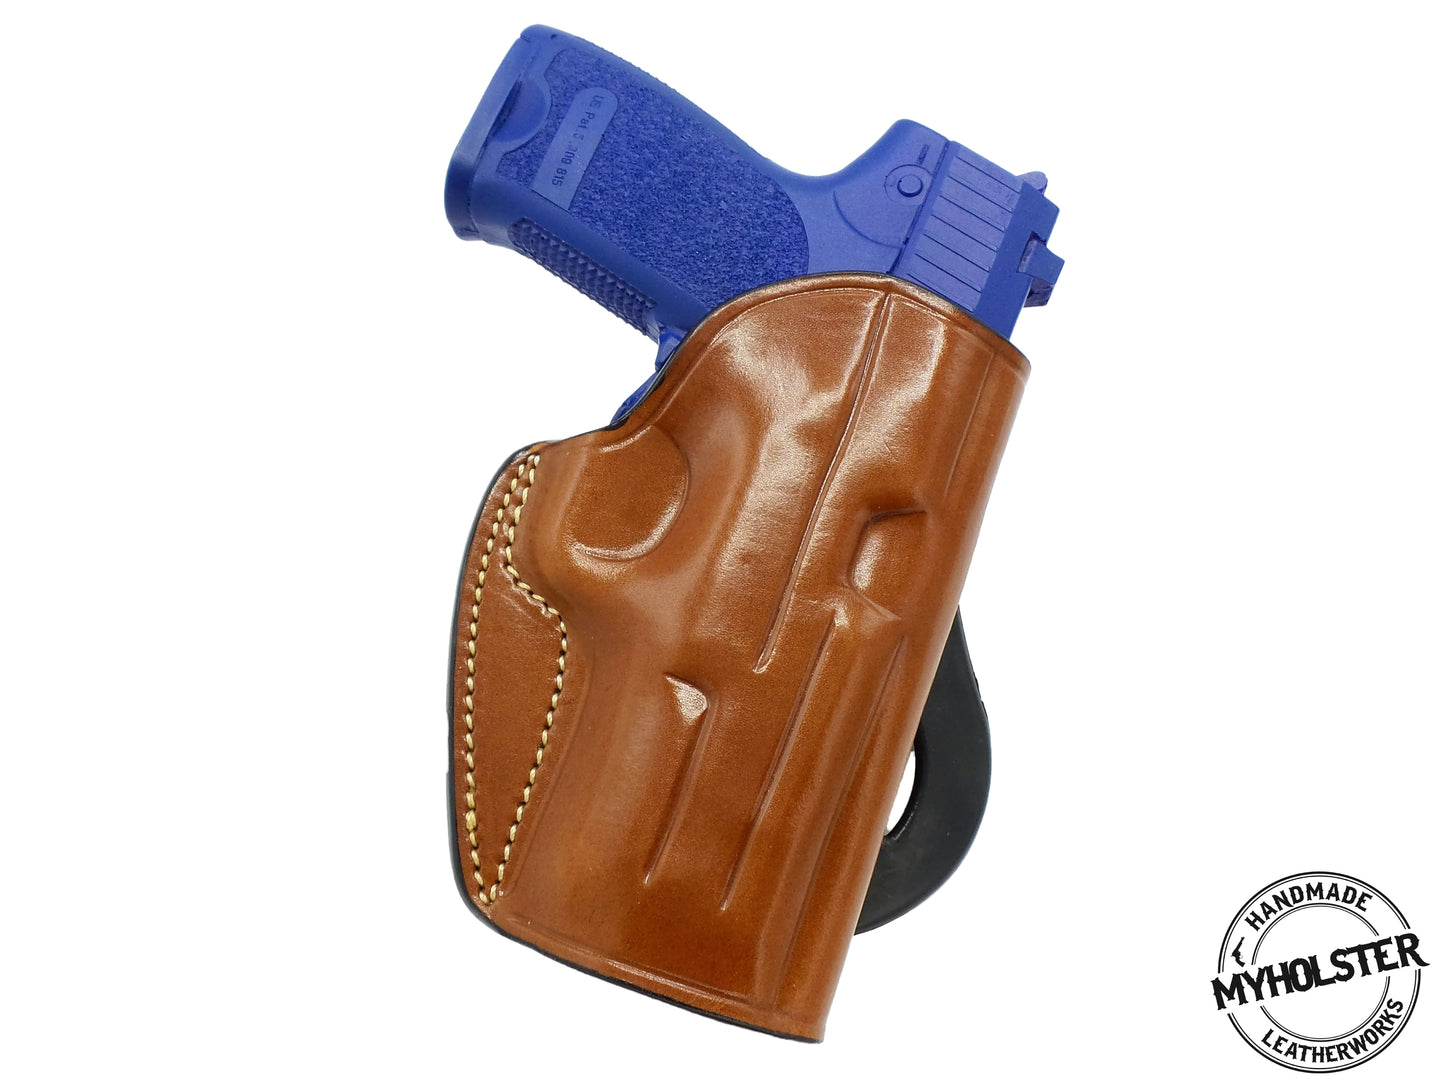 GLOCK 21 OWB Leather Quick Draw Right Hand Paddle Holster - Choose Your Color